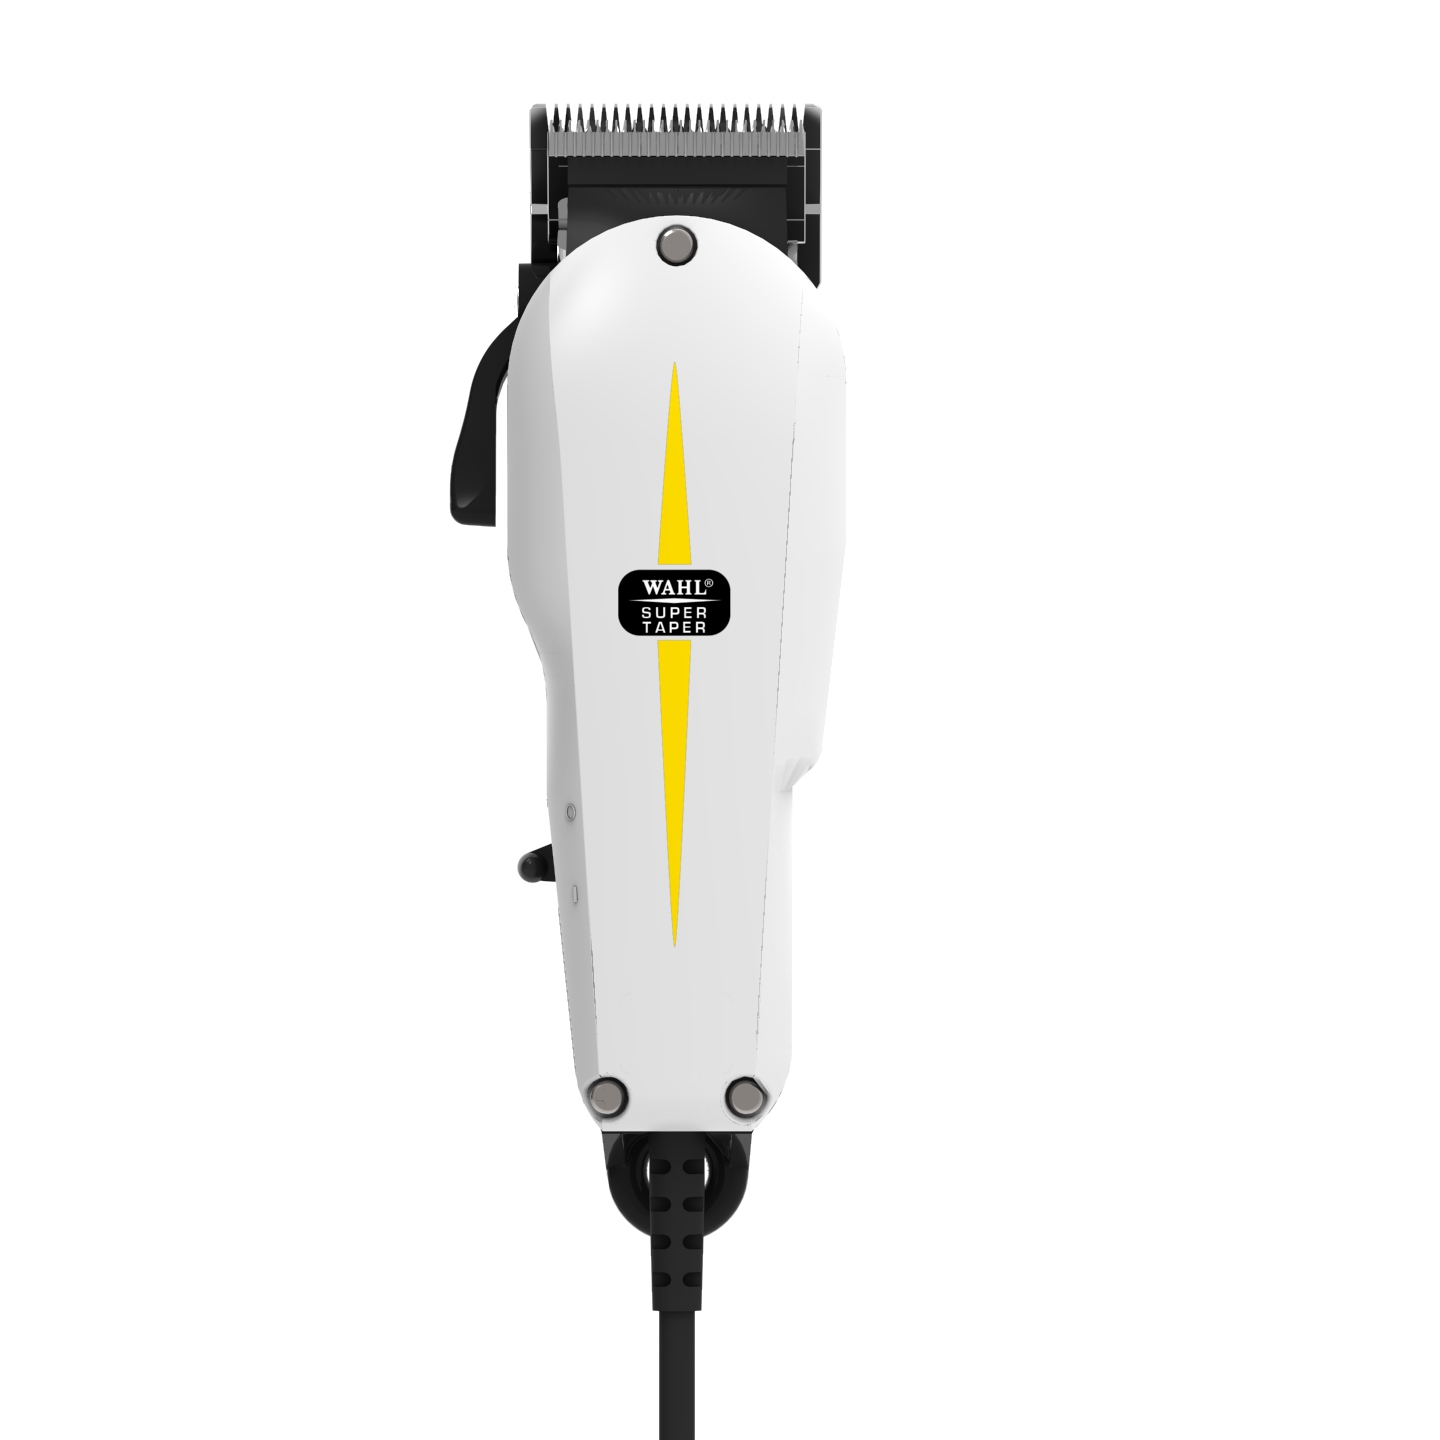 hair clippers with extra long guards